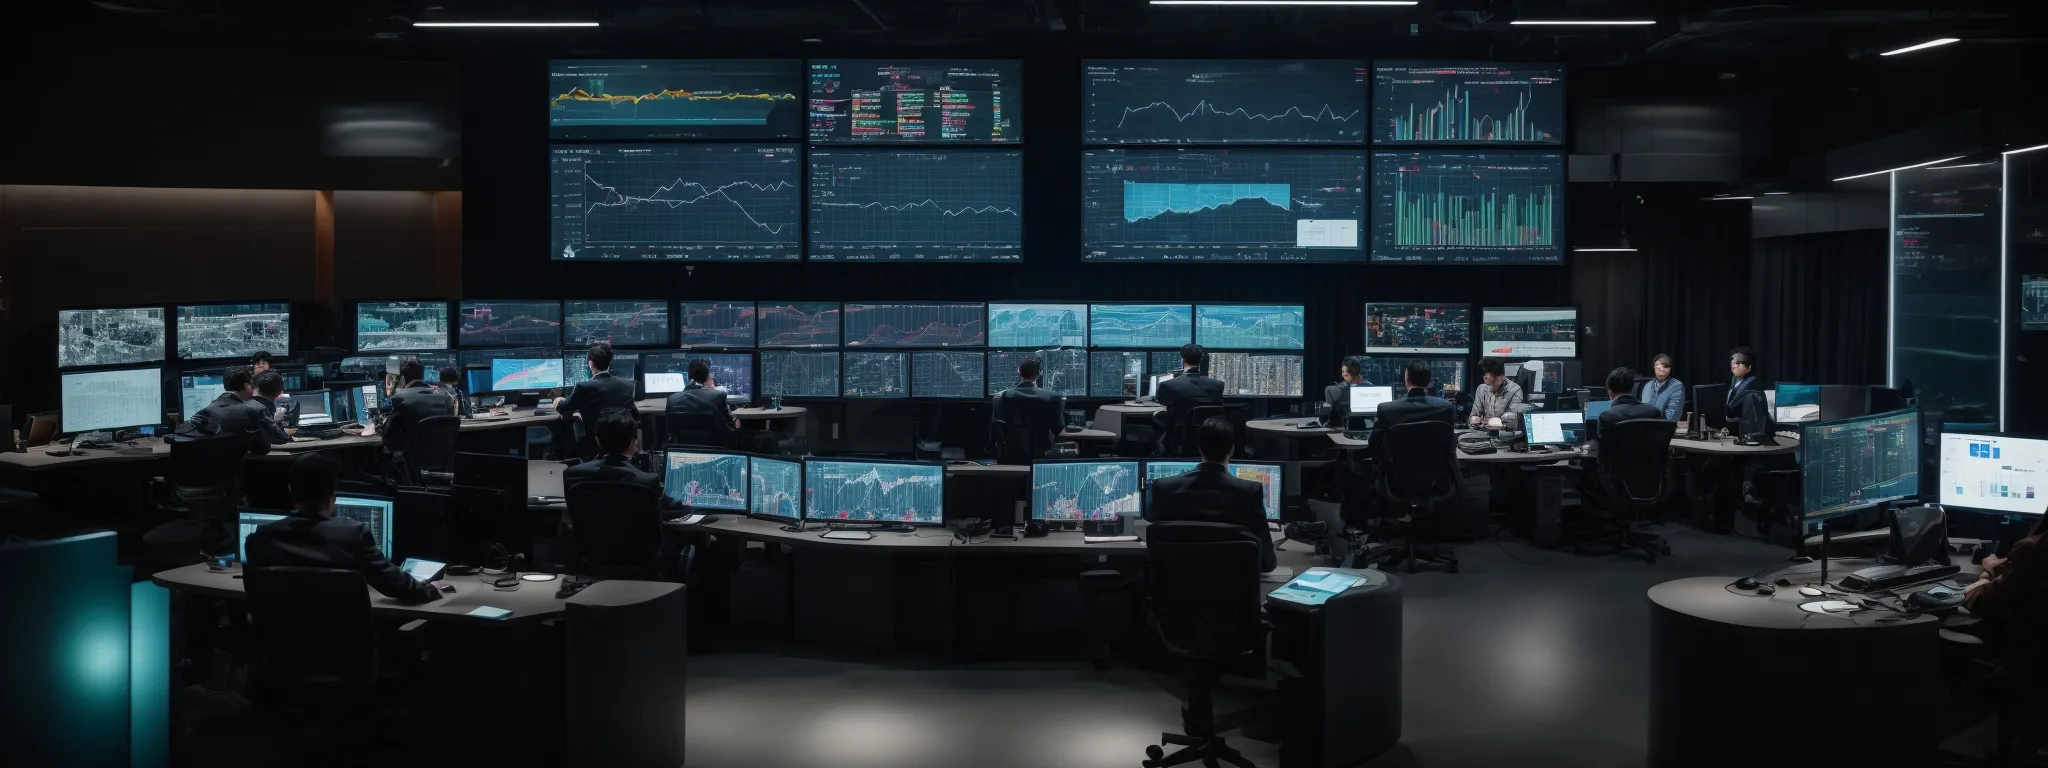 a high-tech control room with multiple screens displaying graphs and data analytics, where a group of professionals is collaboratively strategizing their next marketing move.